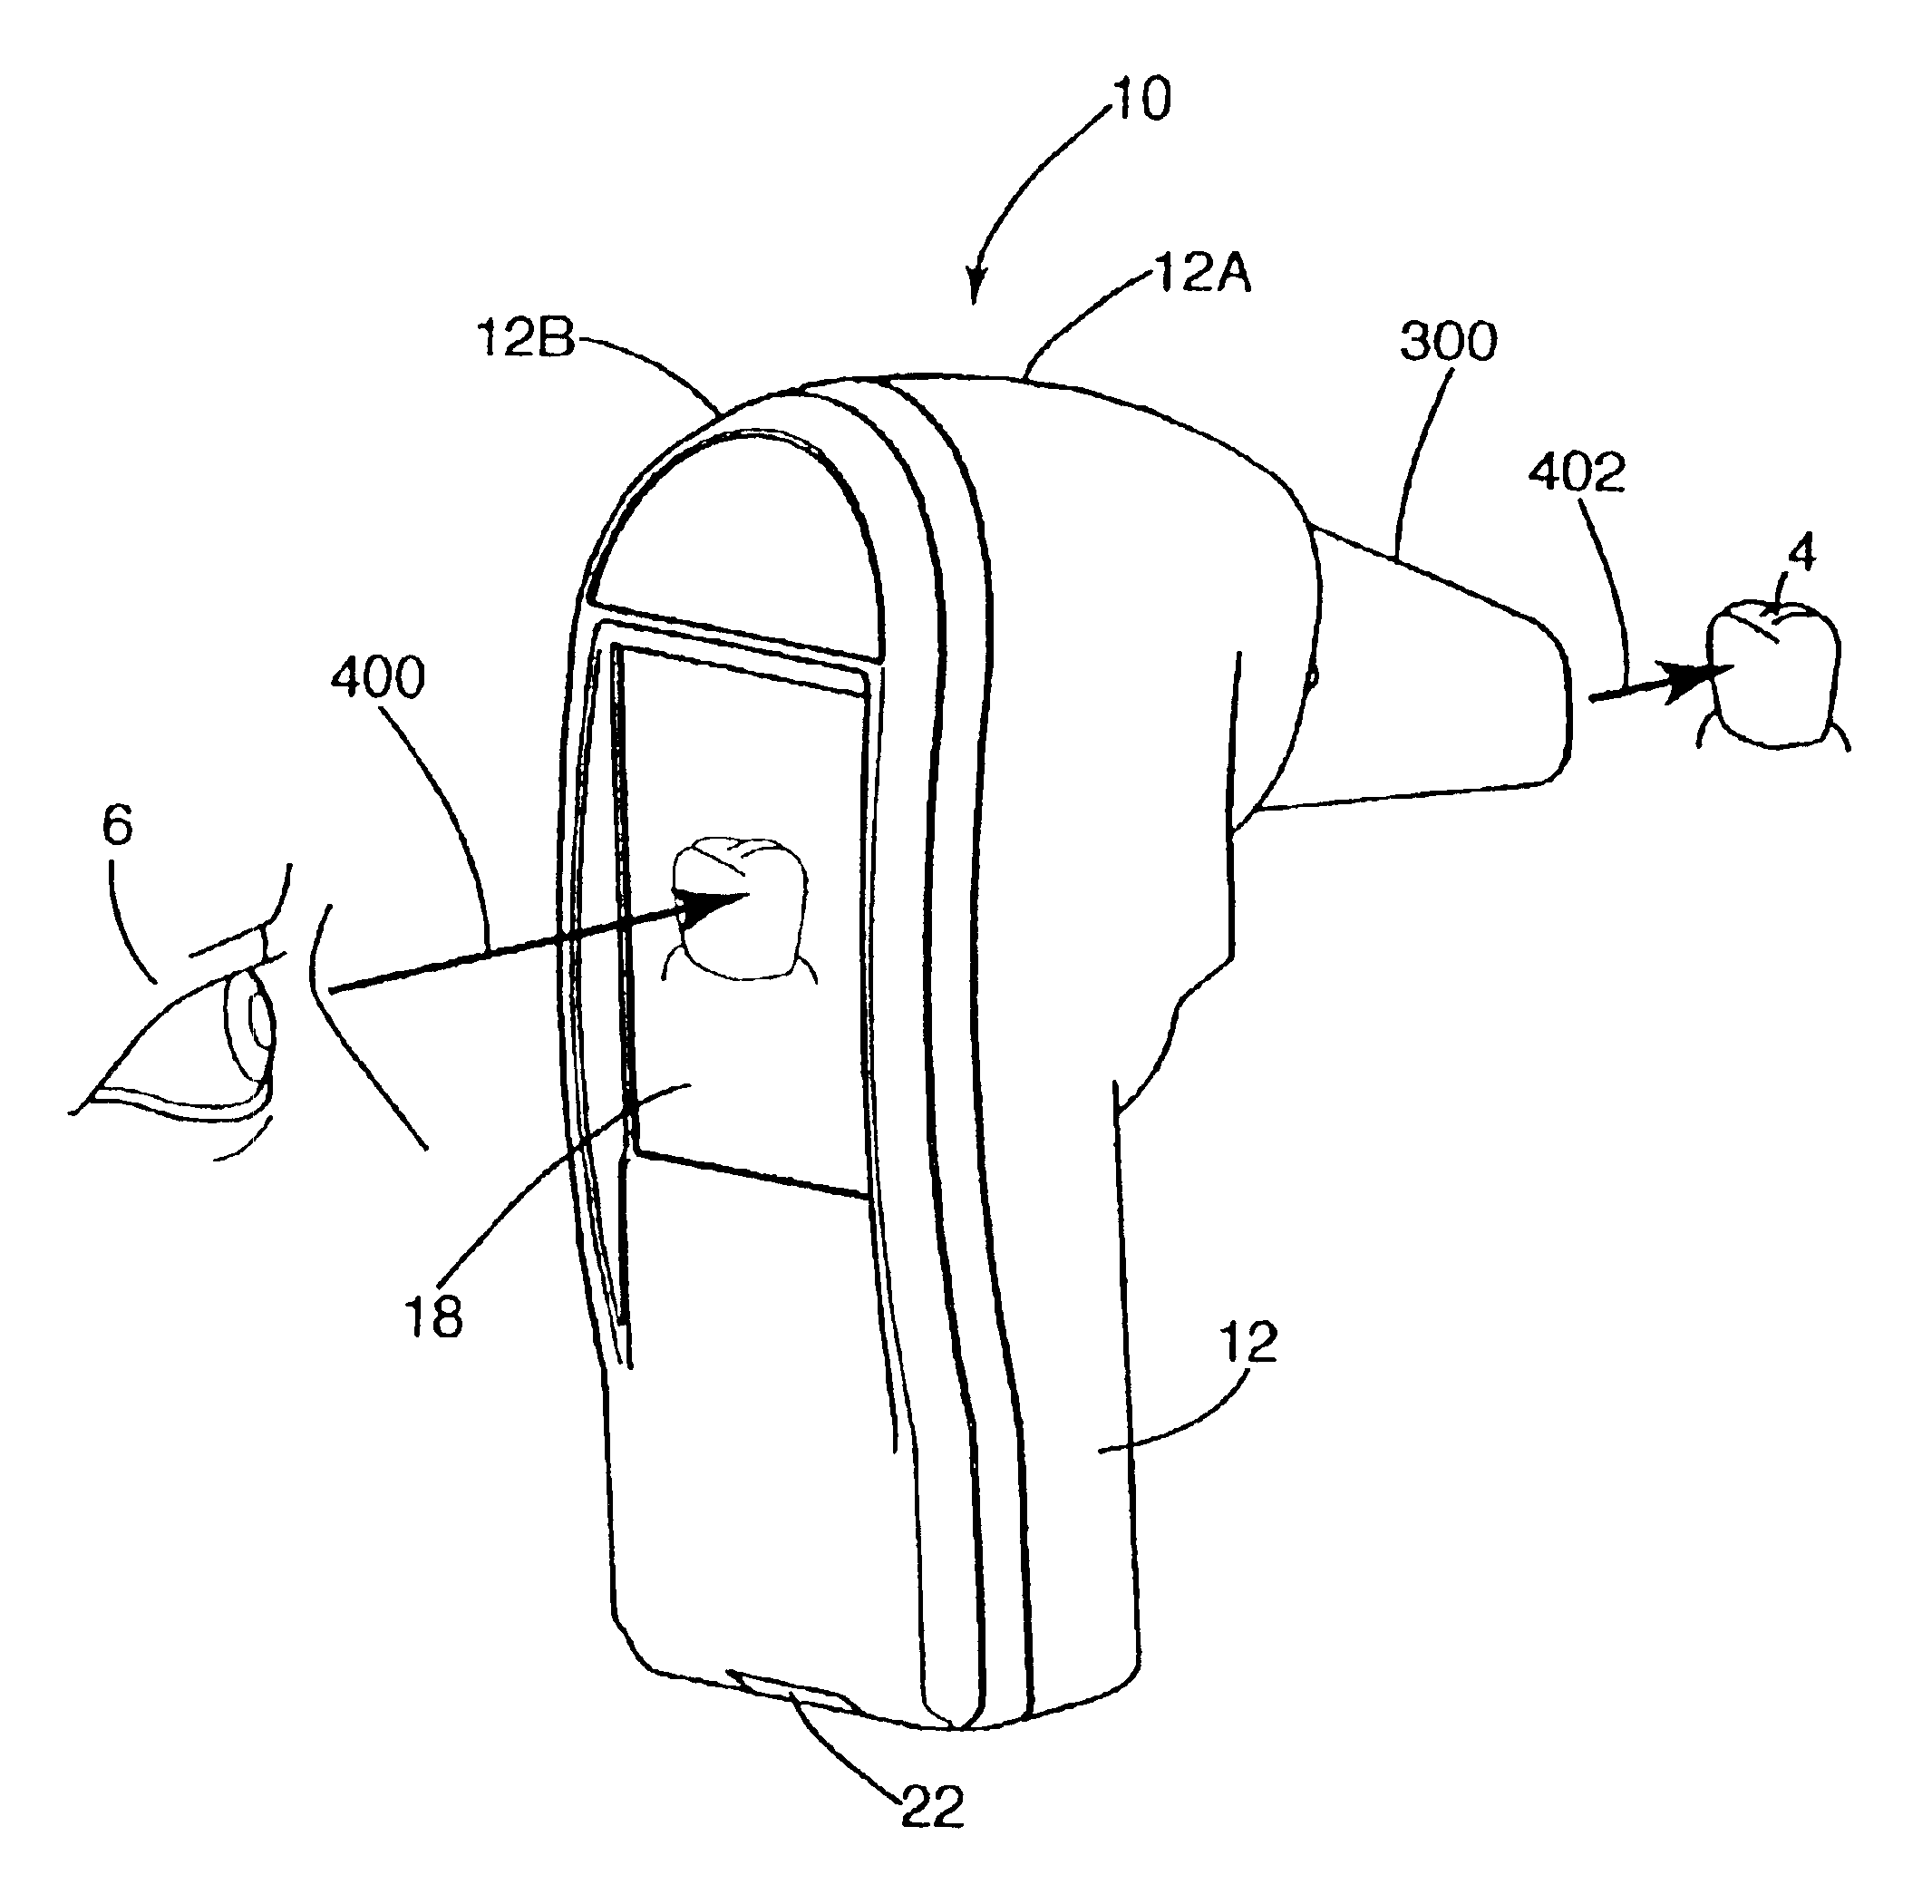 Optical measurement device and related process